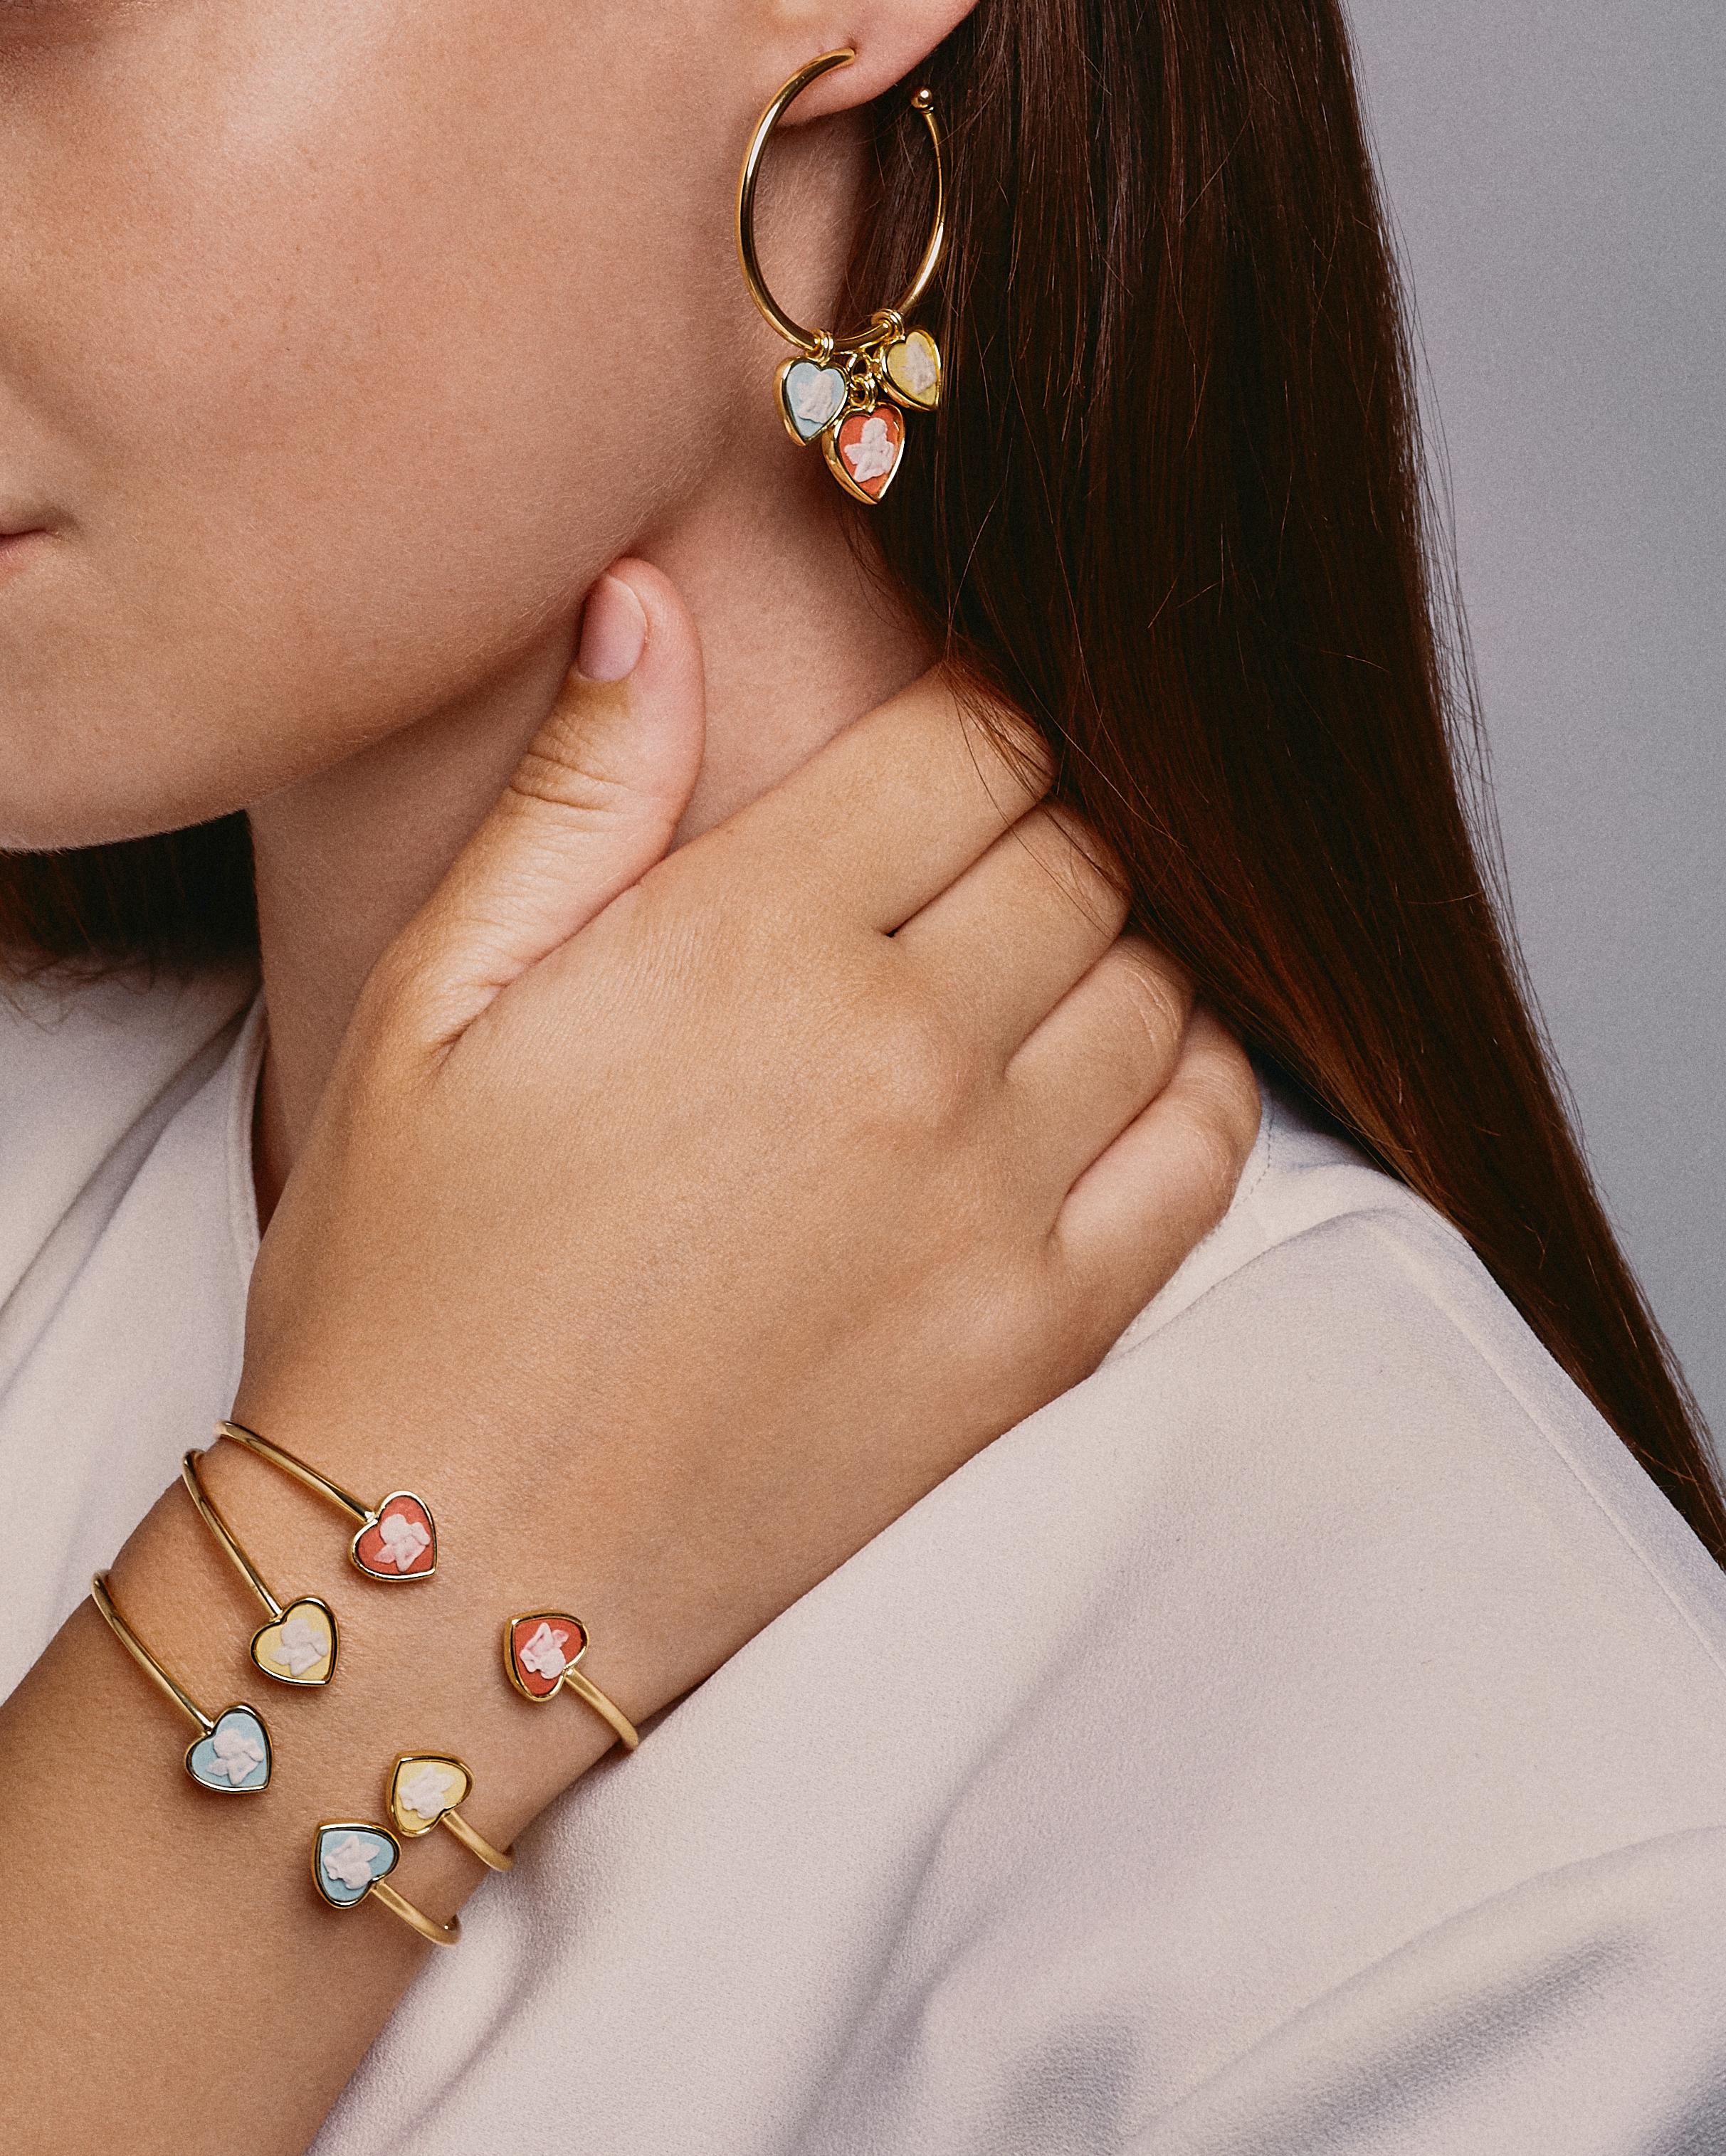 18ct gold plated sterling silver and fine porcelain.
Handmade in Italy

Beyond collection design to go further than the classic interpretations of the Cameo. With the freedom of shape and colour, it contemporises a design with a historic identity,